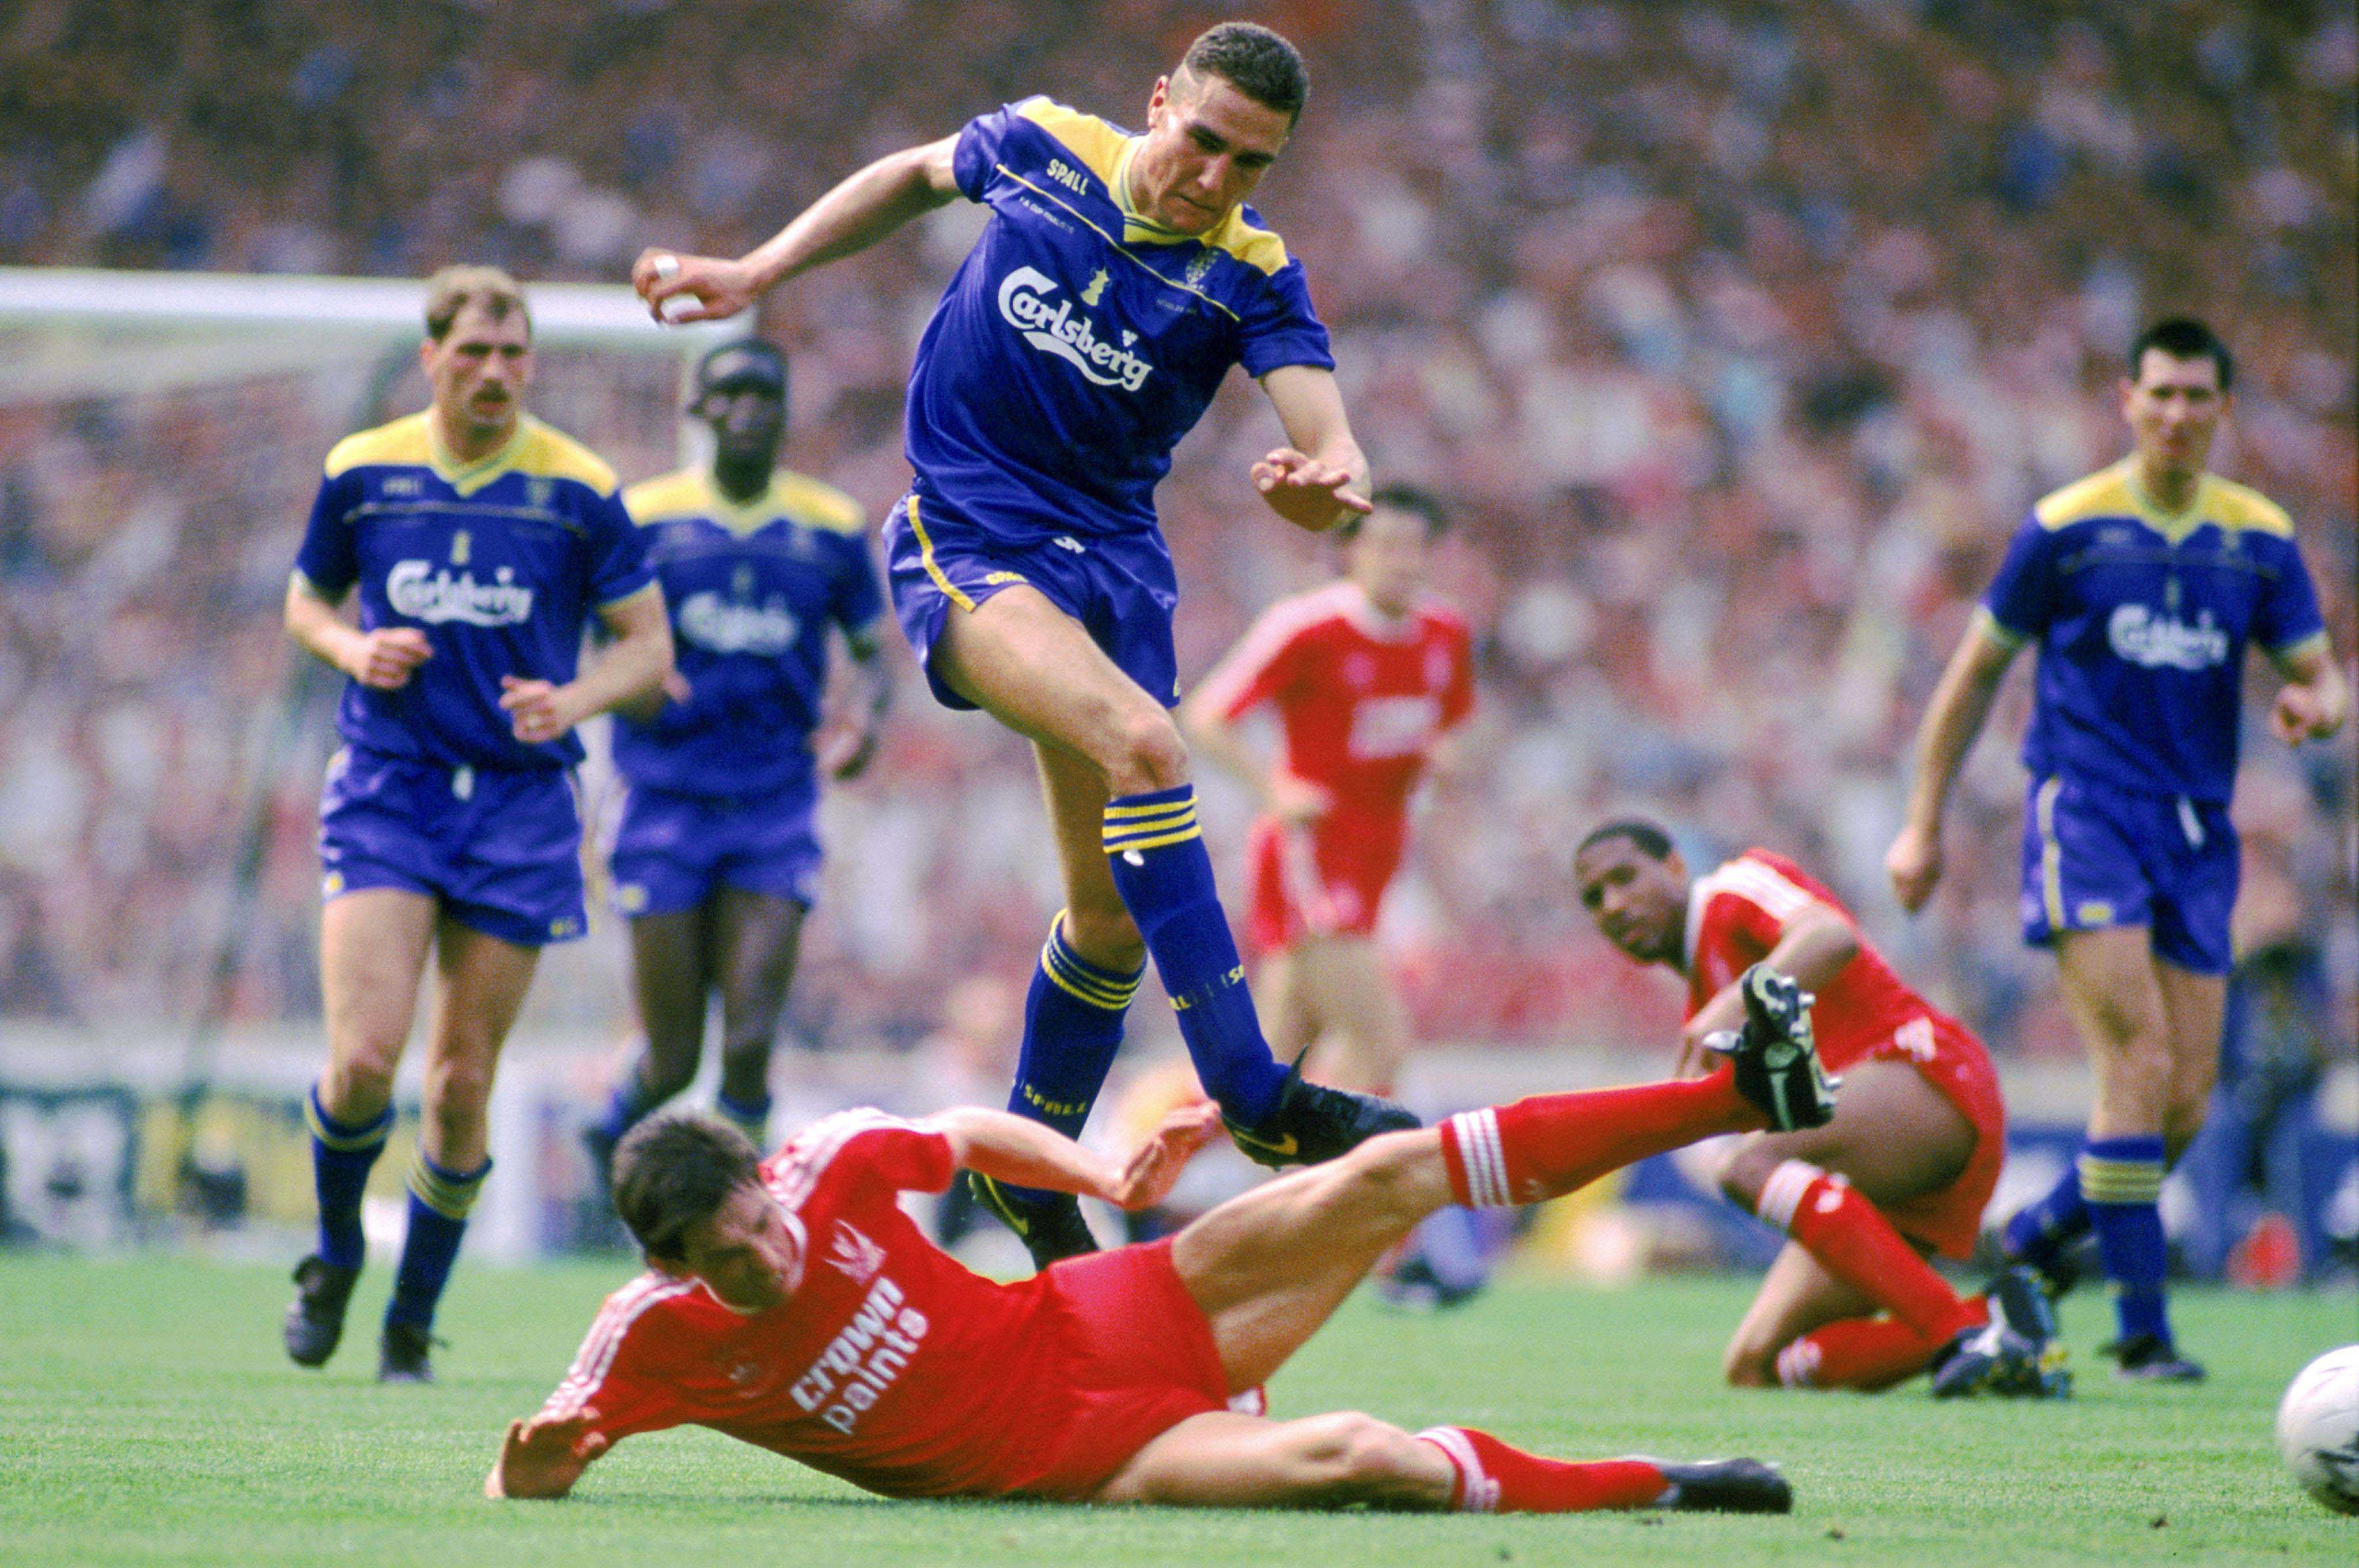 AFC WIMBLEDON v LIVERPOOL: THE FA CUP GHOSTS OF 1988